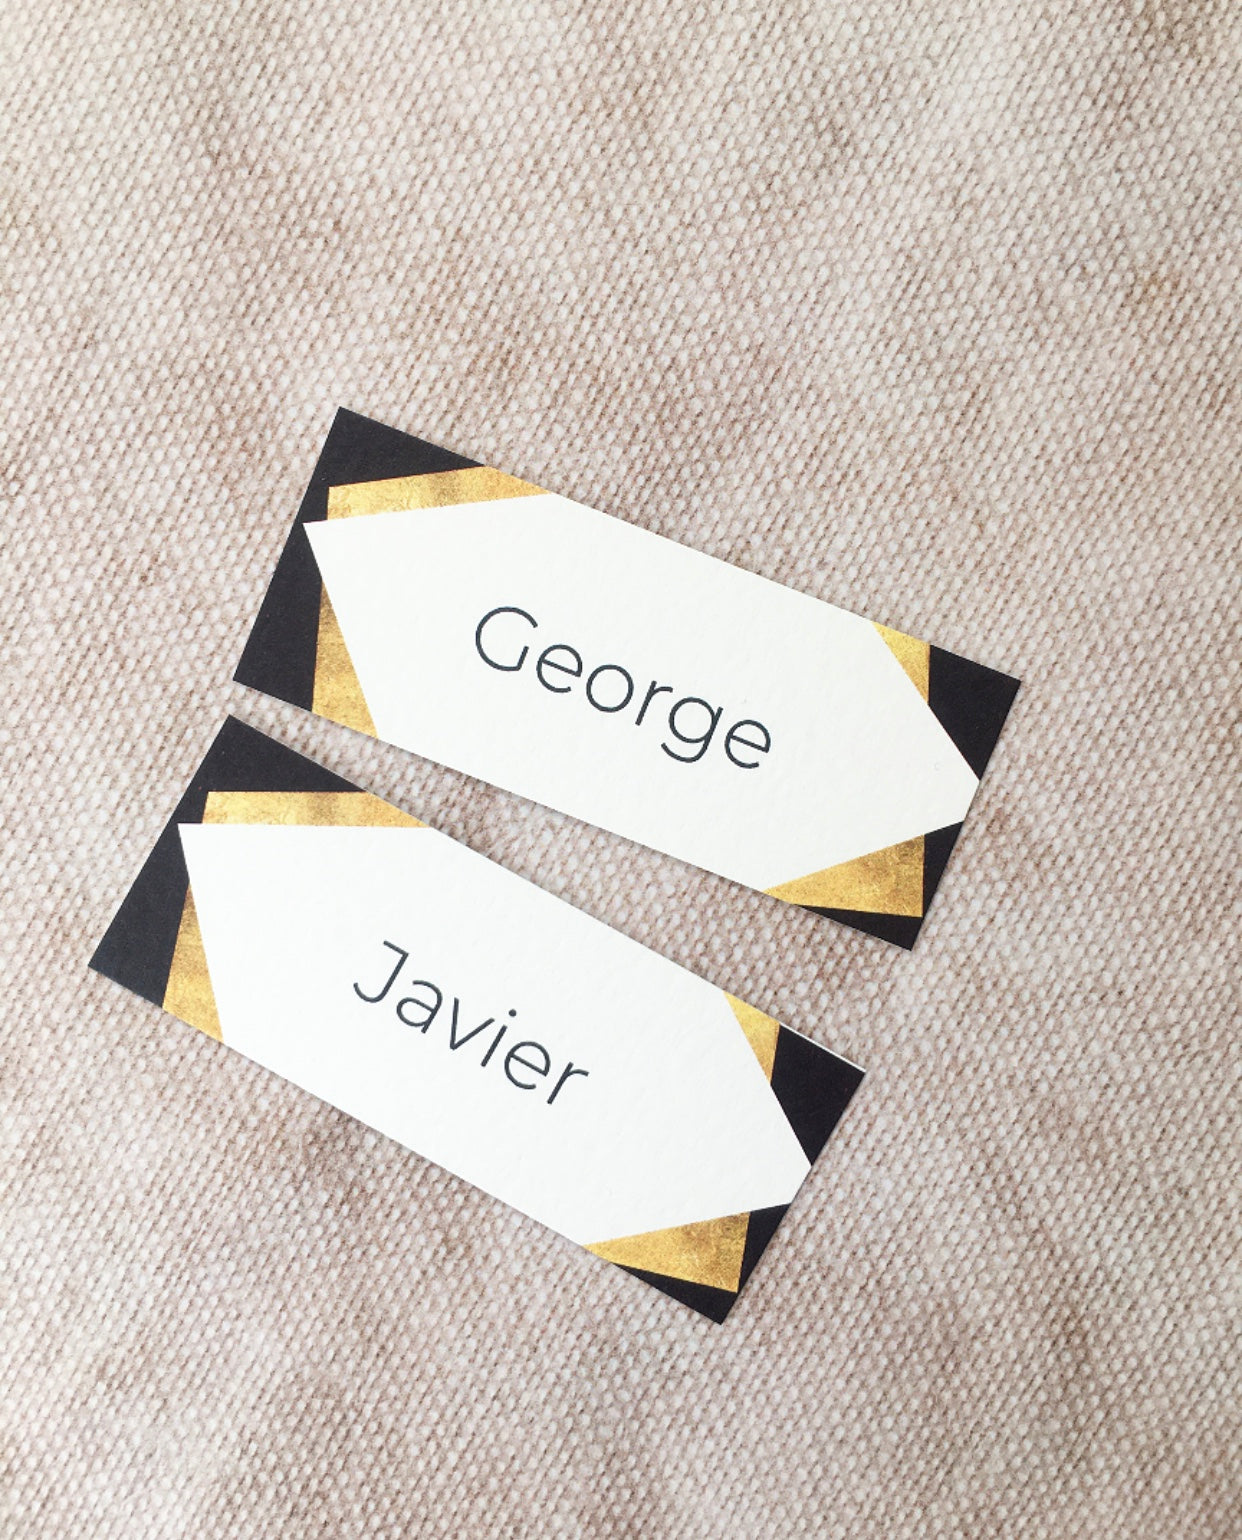 Black & Gold Art Deco-Style Wedding Place Name Cards